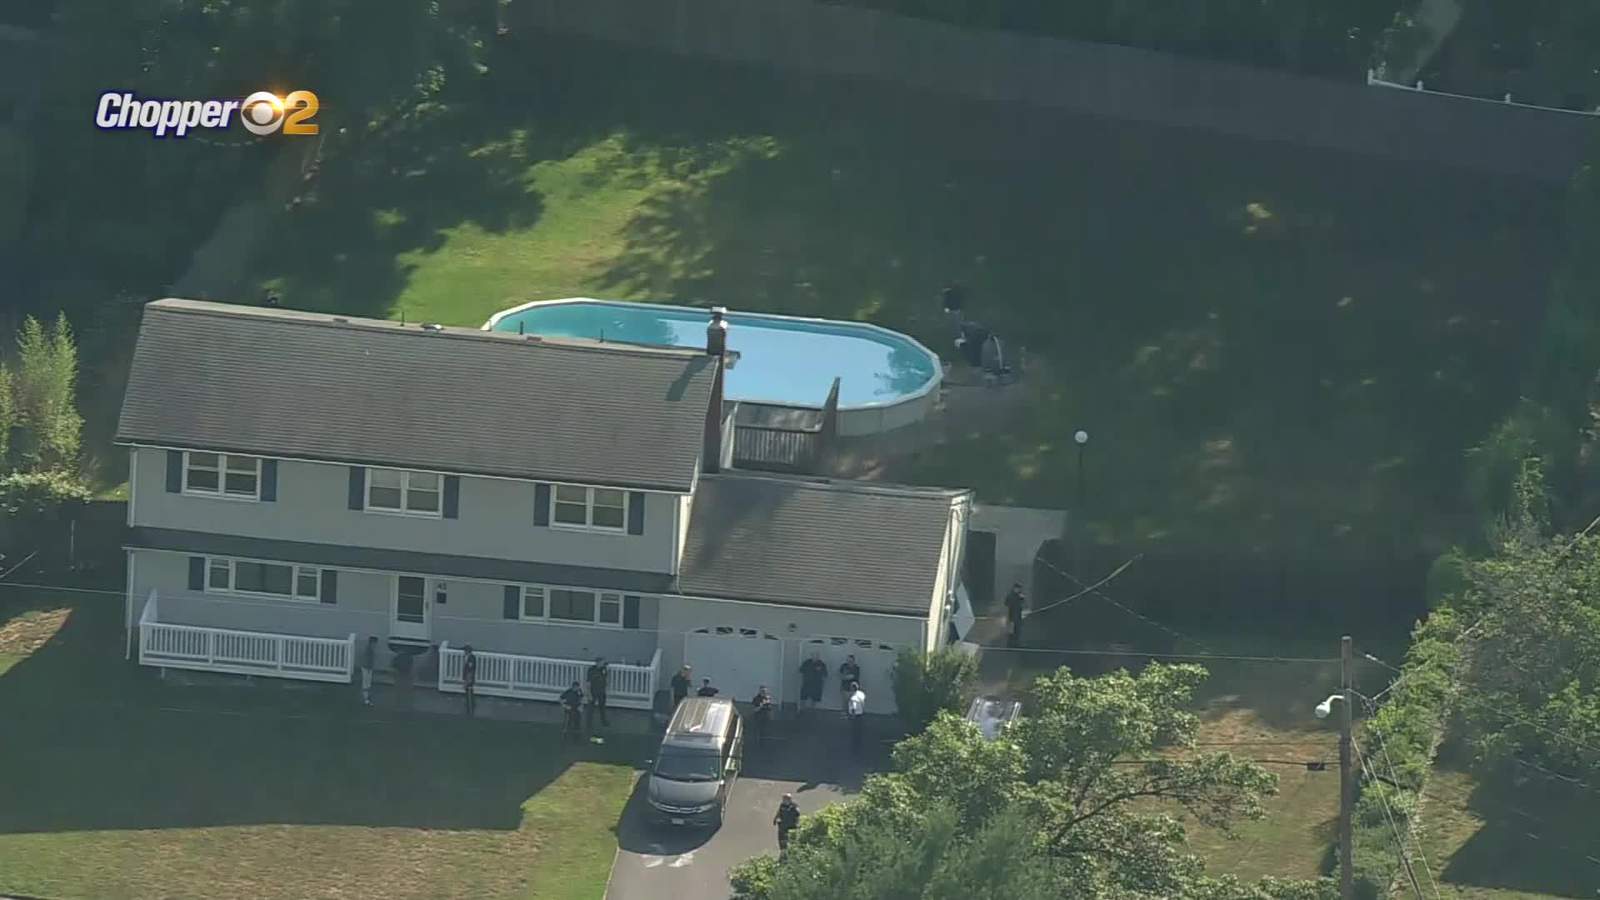 An 8-year-old girl, her mother and her grandfather drown in their new home’s swimming pool